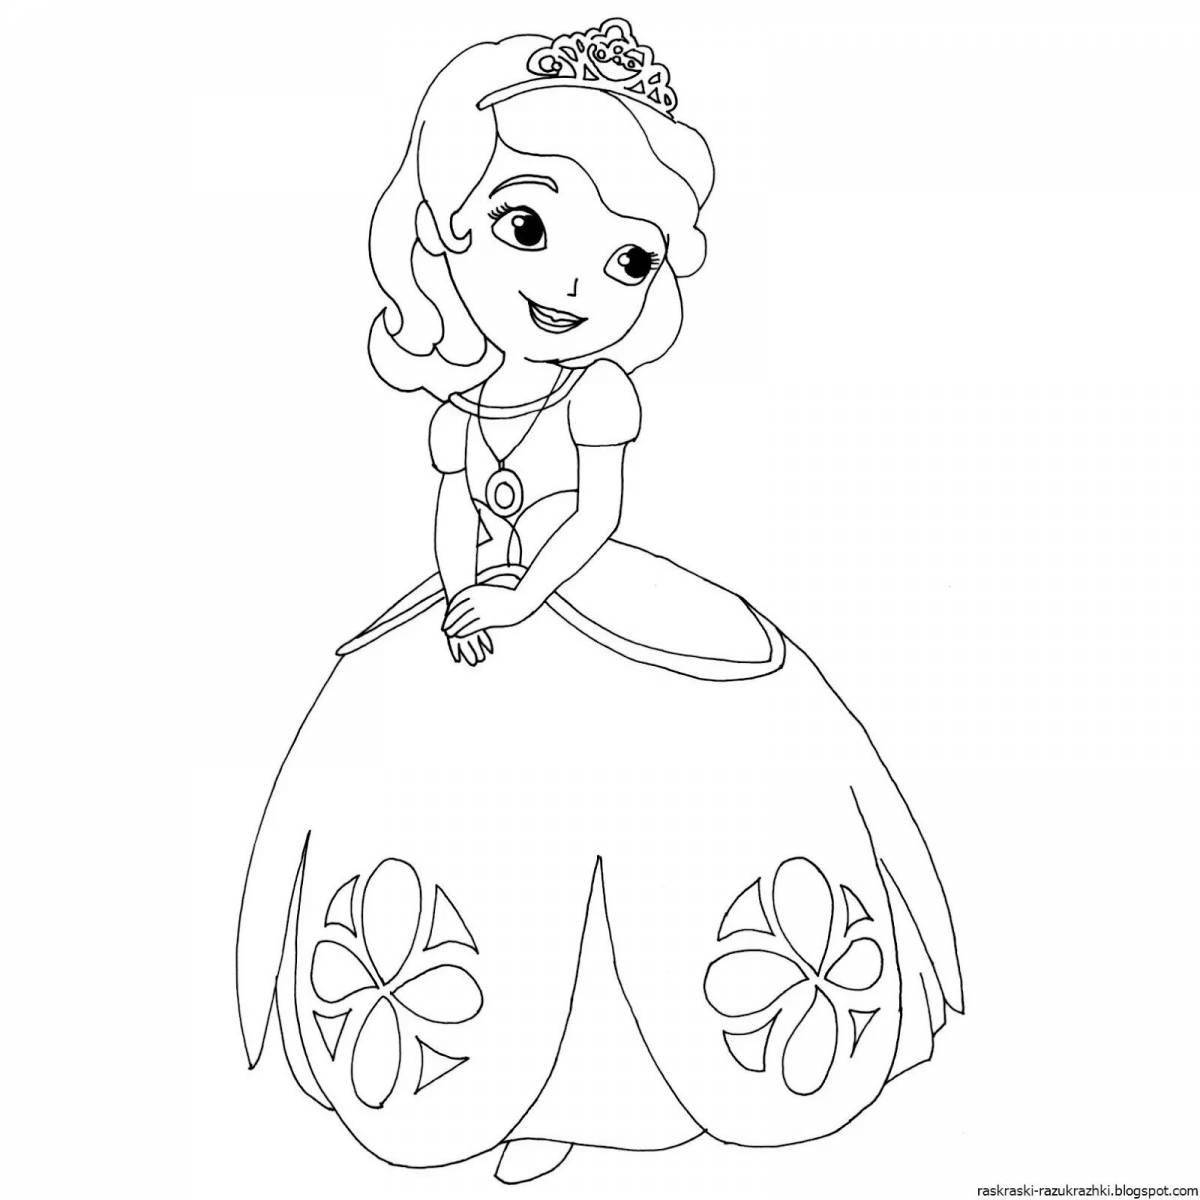 Whimsical coloring book for 3-4 year old princess girls